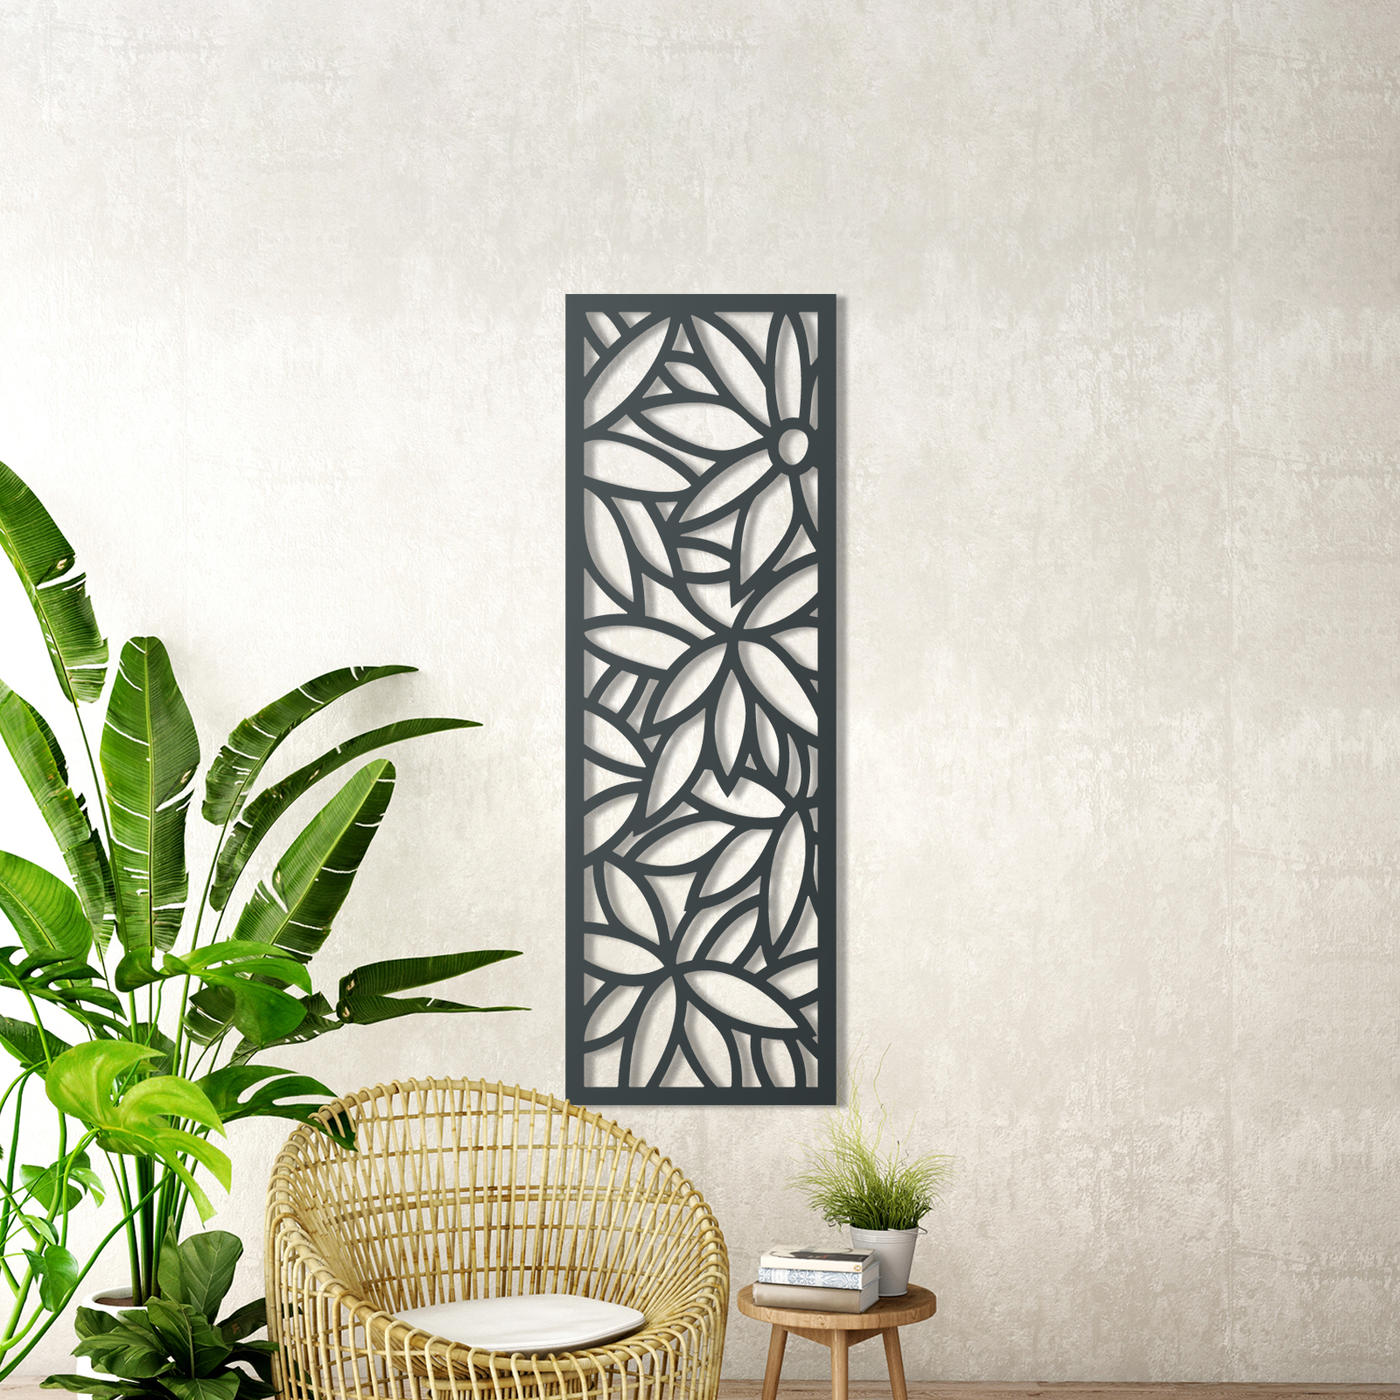 Flower Bloom Metal Garden Screen: A Great Way to Add Style and Privacy to Your Outdoor Space